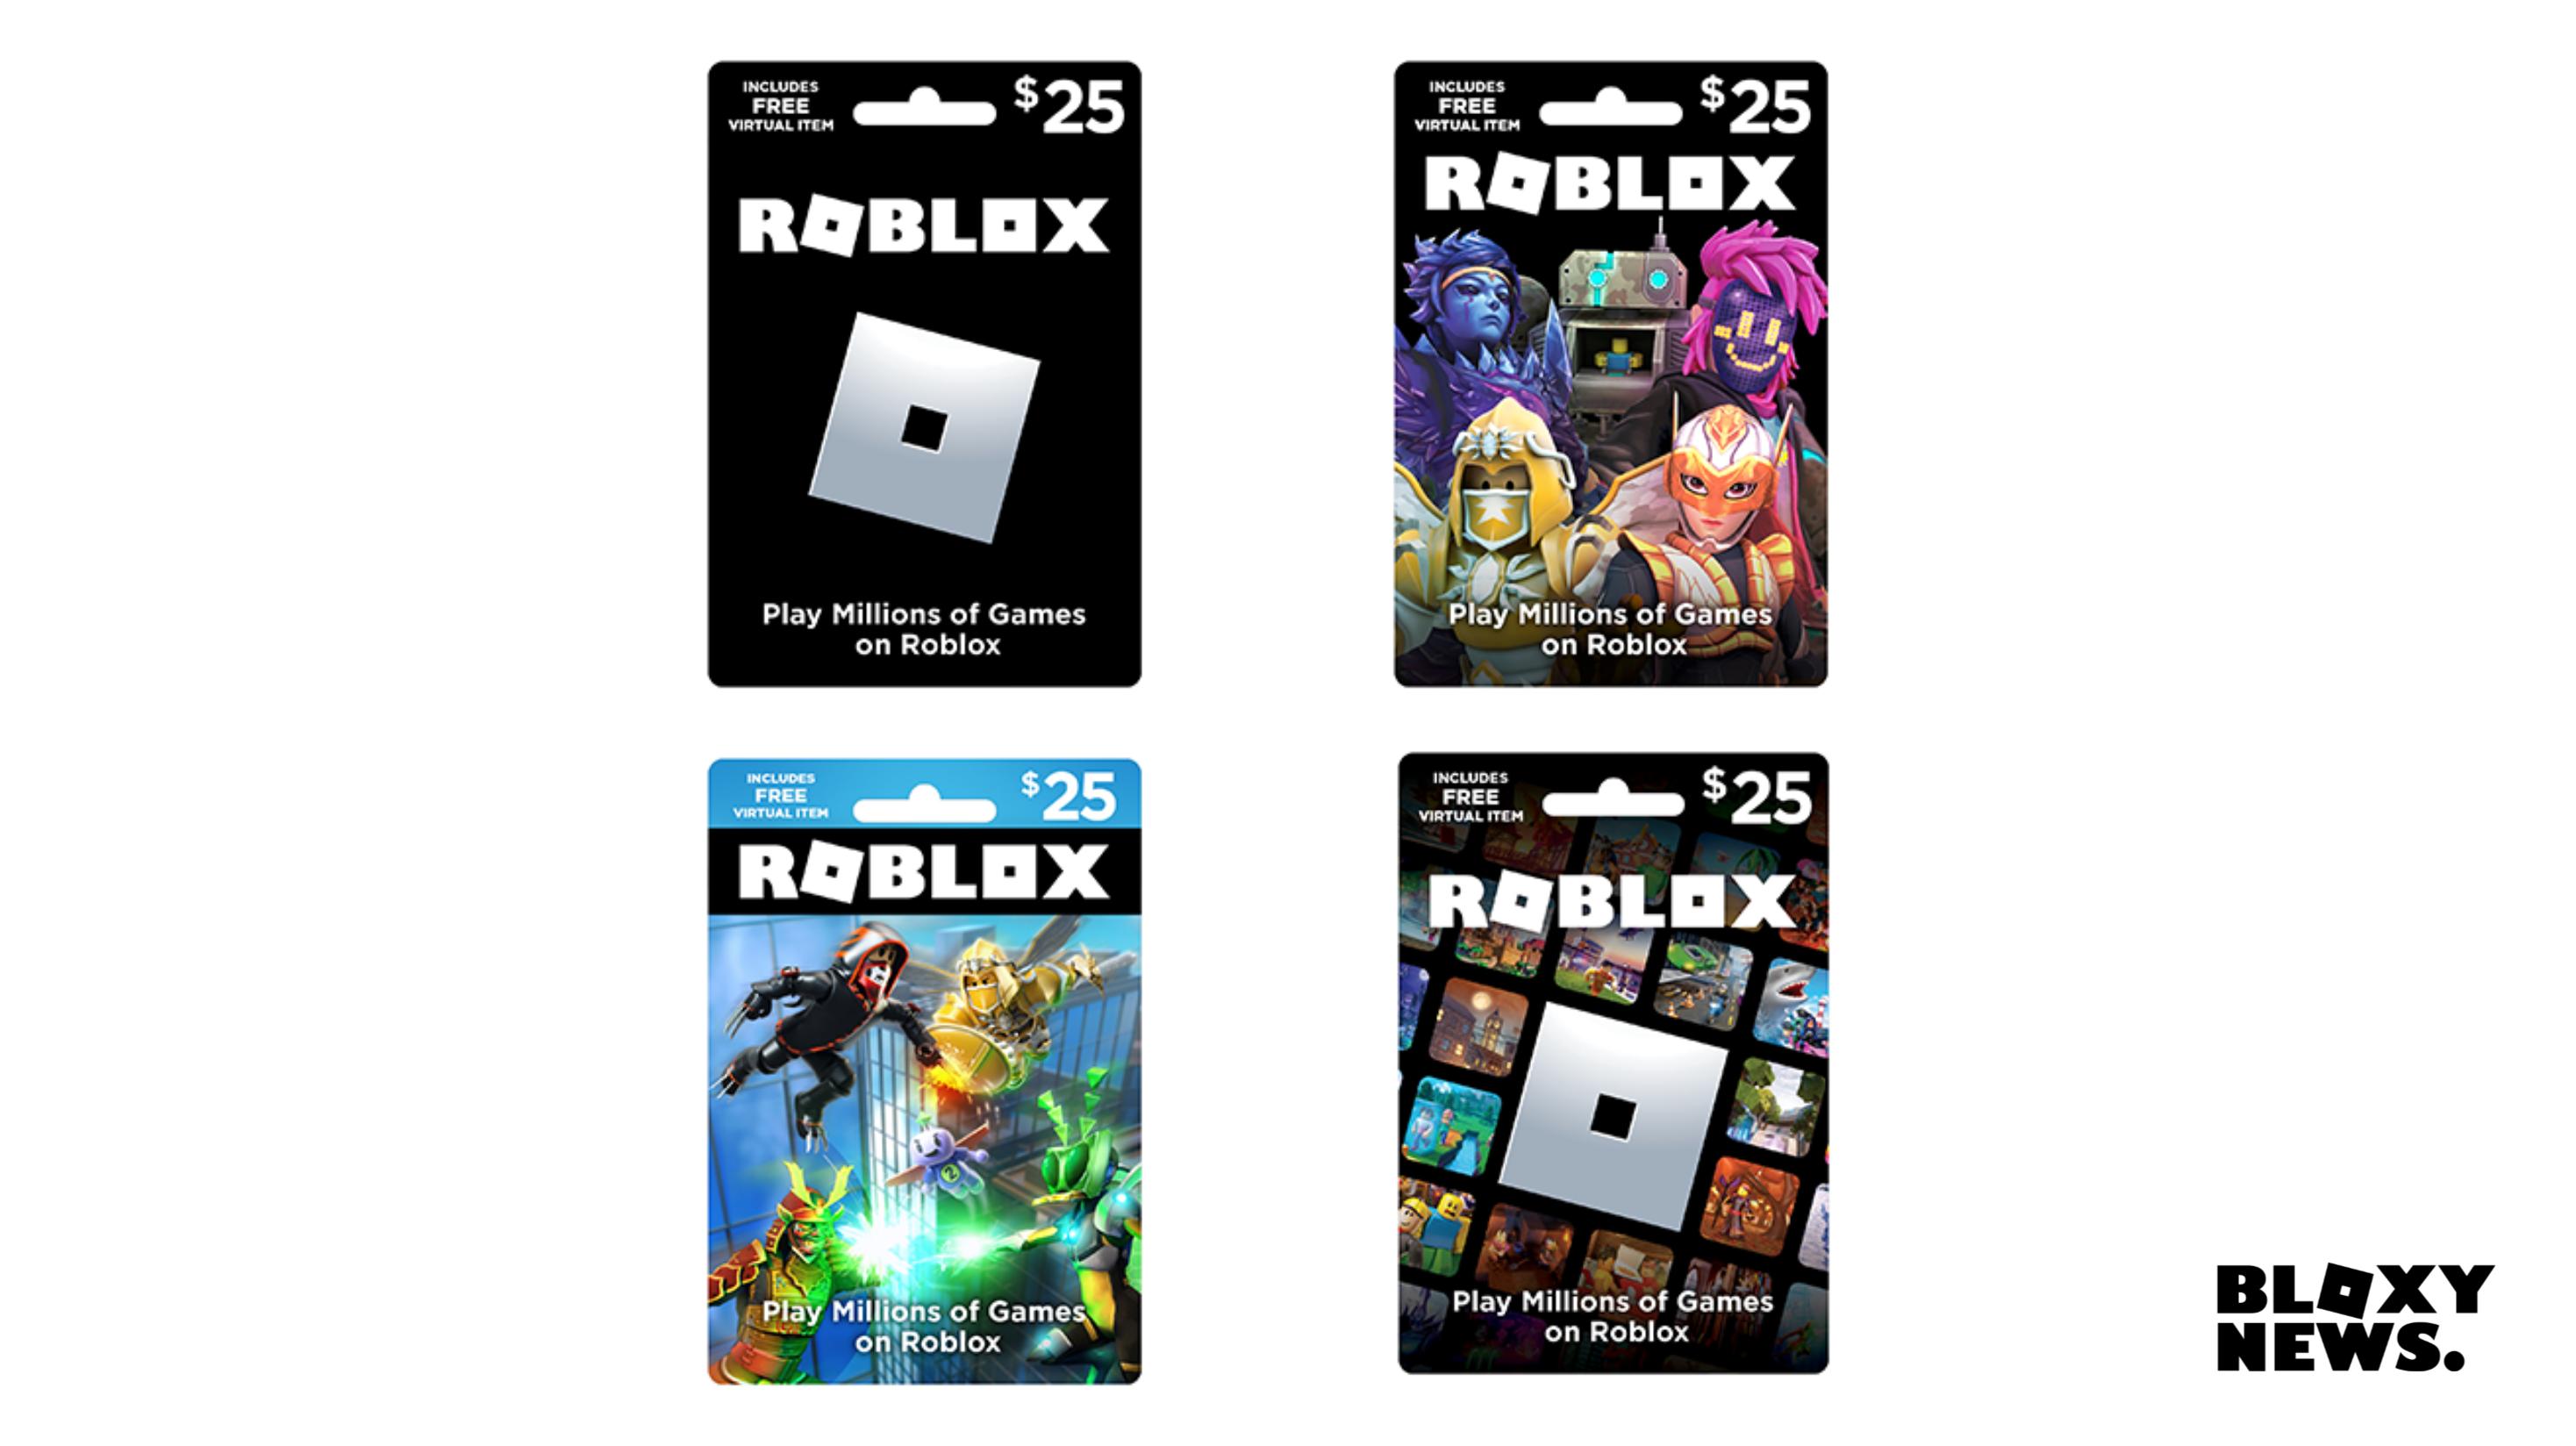 Bloxy News on X: The perfect gift for any #Roblox fan. 🐉 Every